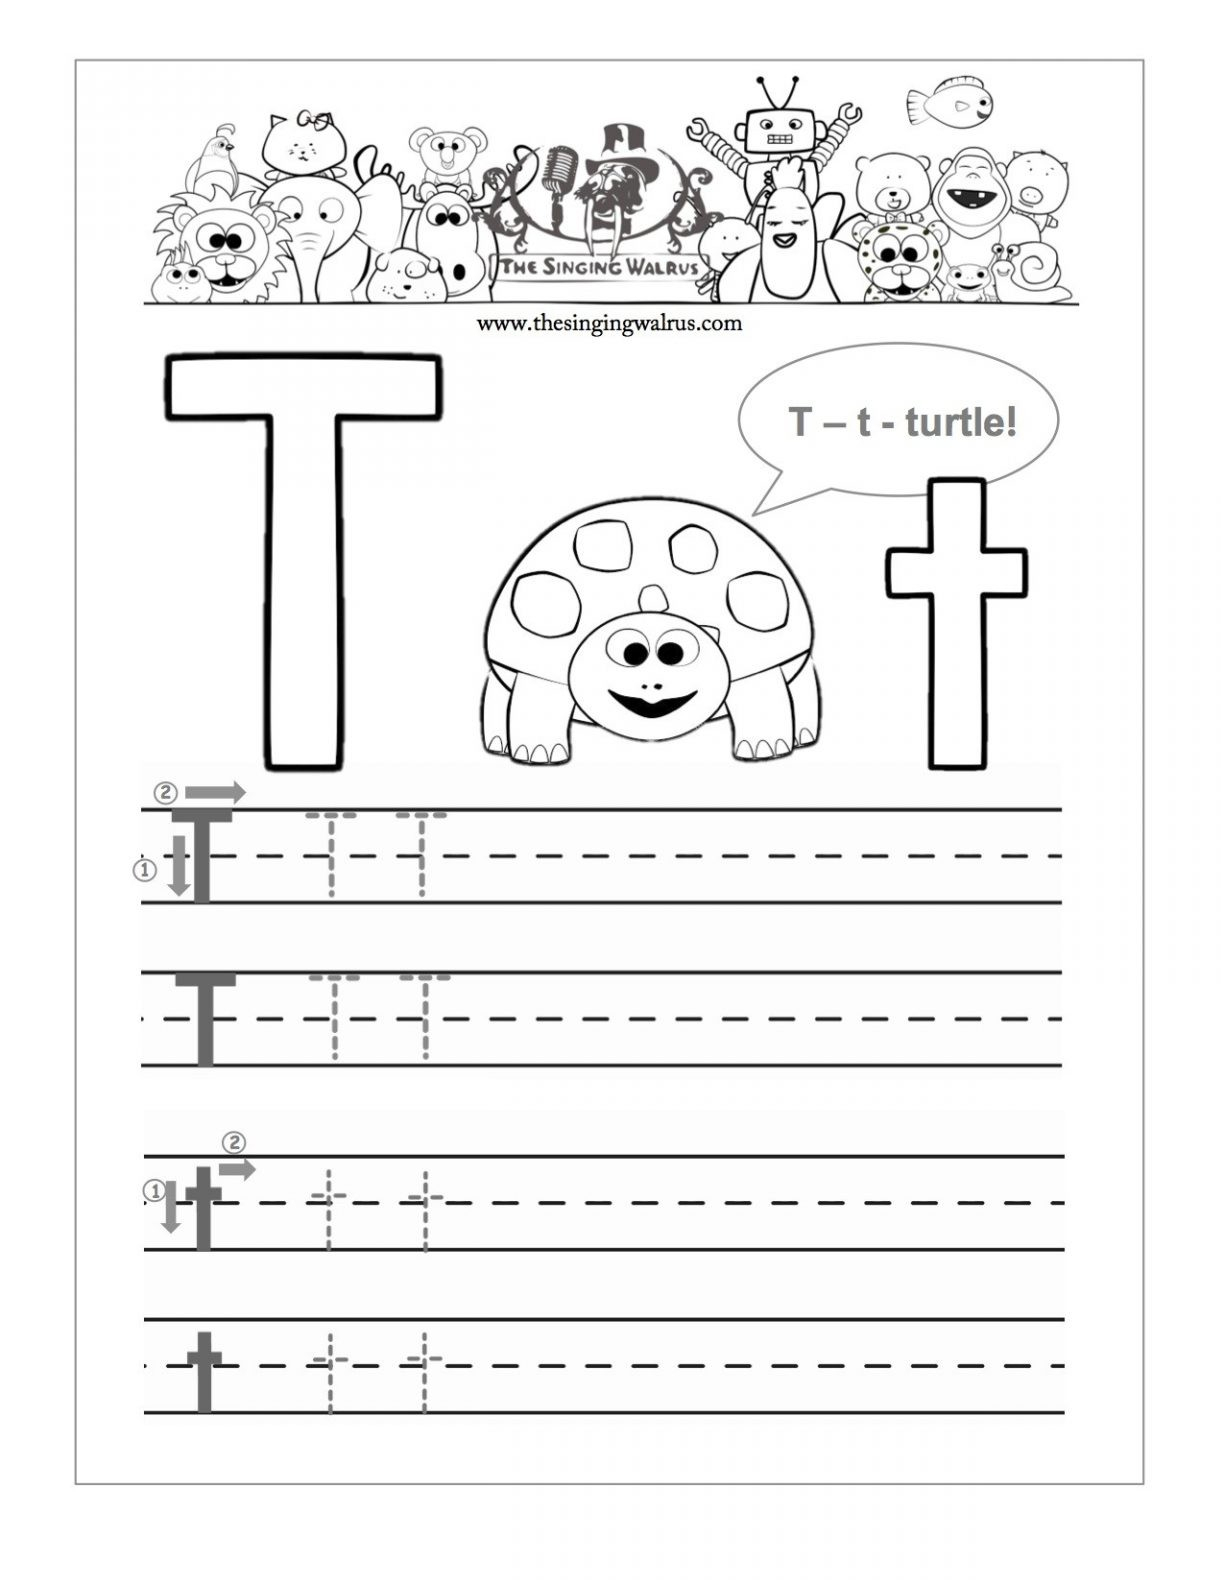 20 Learning The Letter T Worksheets | Kittybabylove within Letter T Worksheets For Toddlers